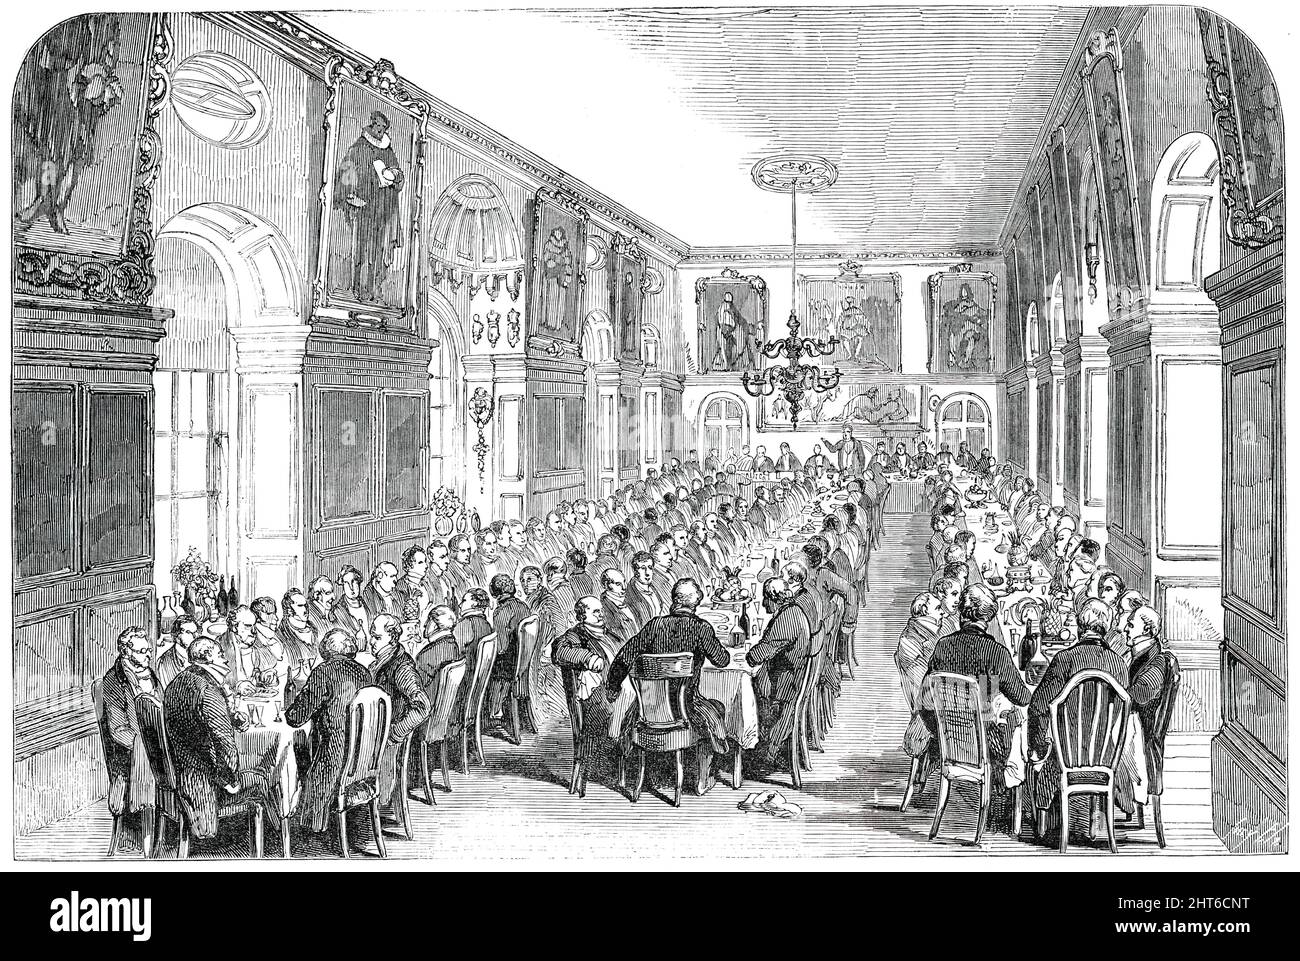 Annual Dinner of the Governors of Bridewell and Bethlem Hospitals, in the Hall, Bridewell, [London], 1850. 'The entertainment takes place in the Great Hall of Bridewell Hospital, a magnificent wainscoted apartment...The President [Sir Peter Laurie]...gave a short summary of the proceedings in each Hospital during the past year, from which it appears that 316 patients had been admitted into Bethlem Hospital, and maintained there free of all charge; and that during the same period 175 patients had been discharged cured. He also stated that 80 poor destitute young offenders had been admitted into Stock Photo